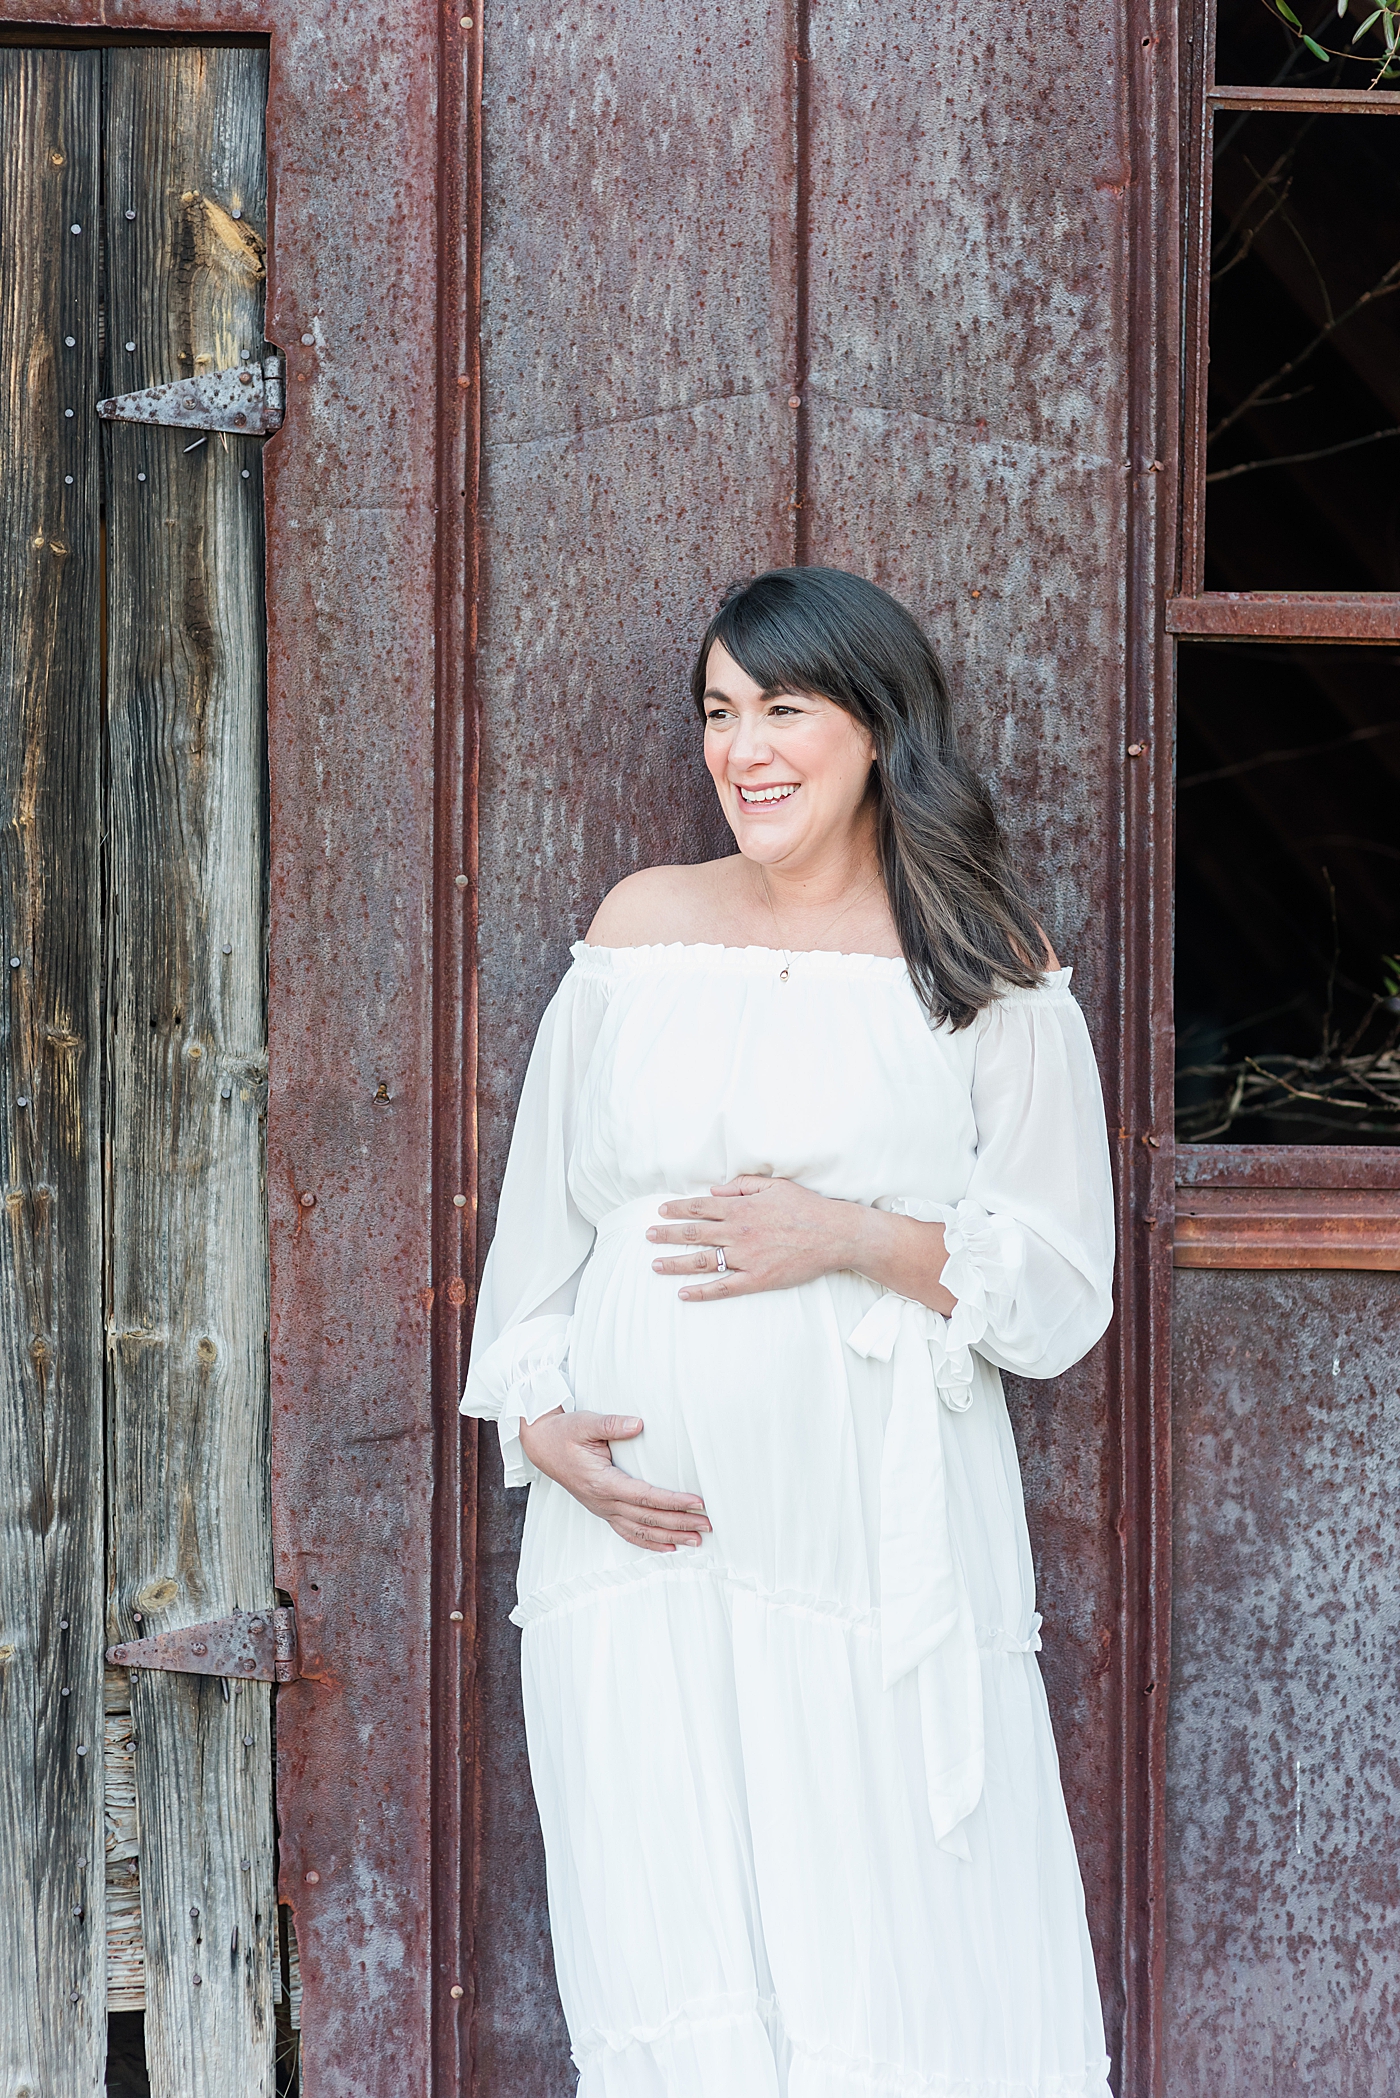 Expecting mother in white dress | Photo by Anna Wisjo Photography